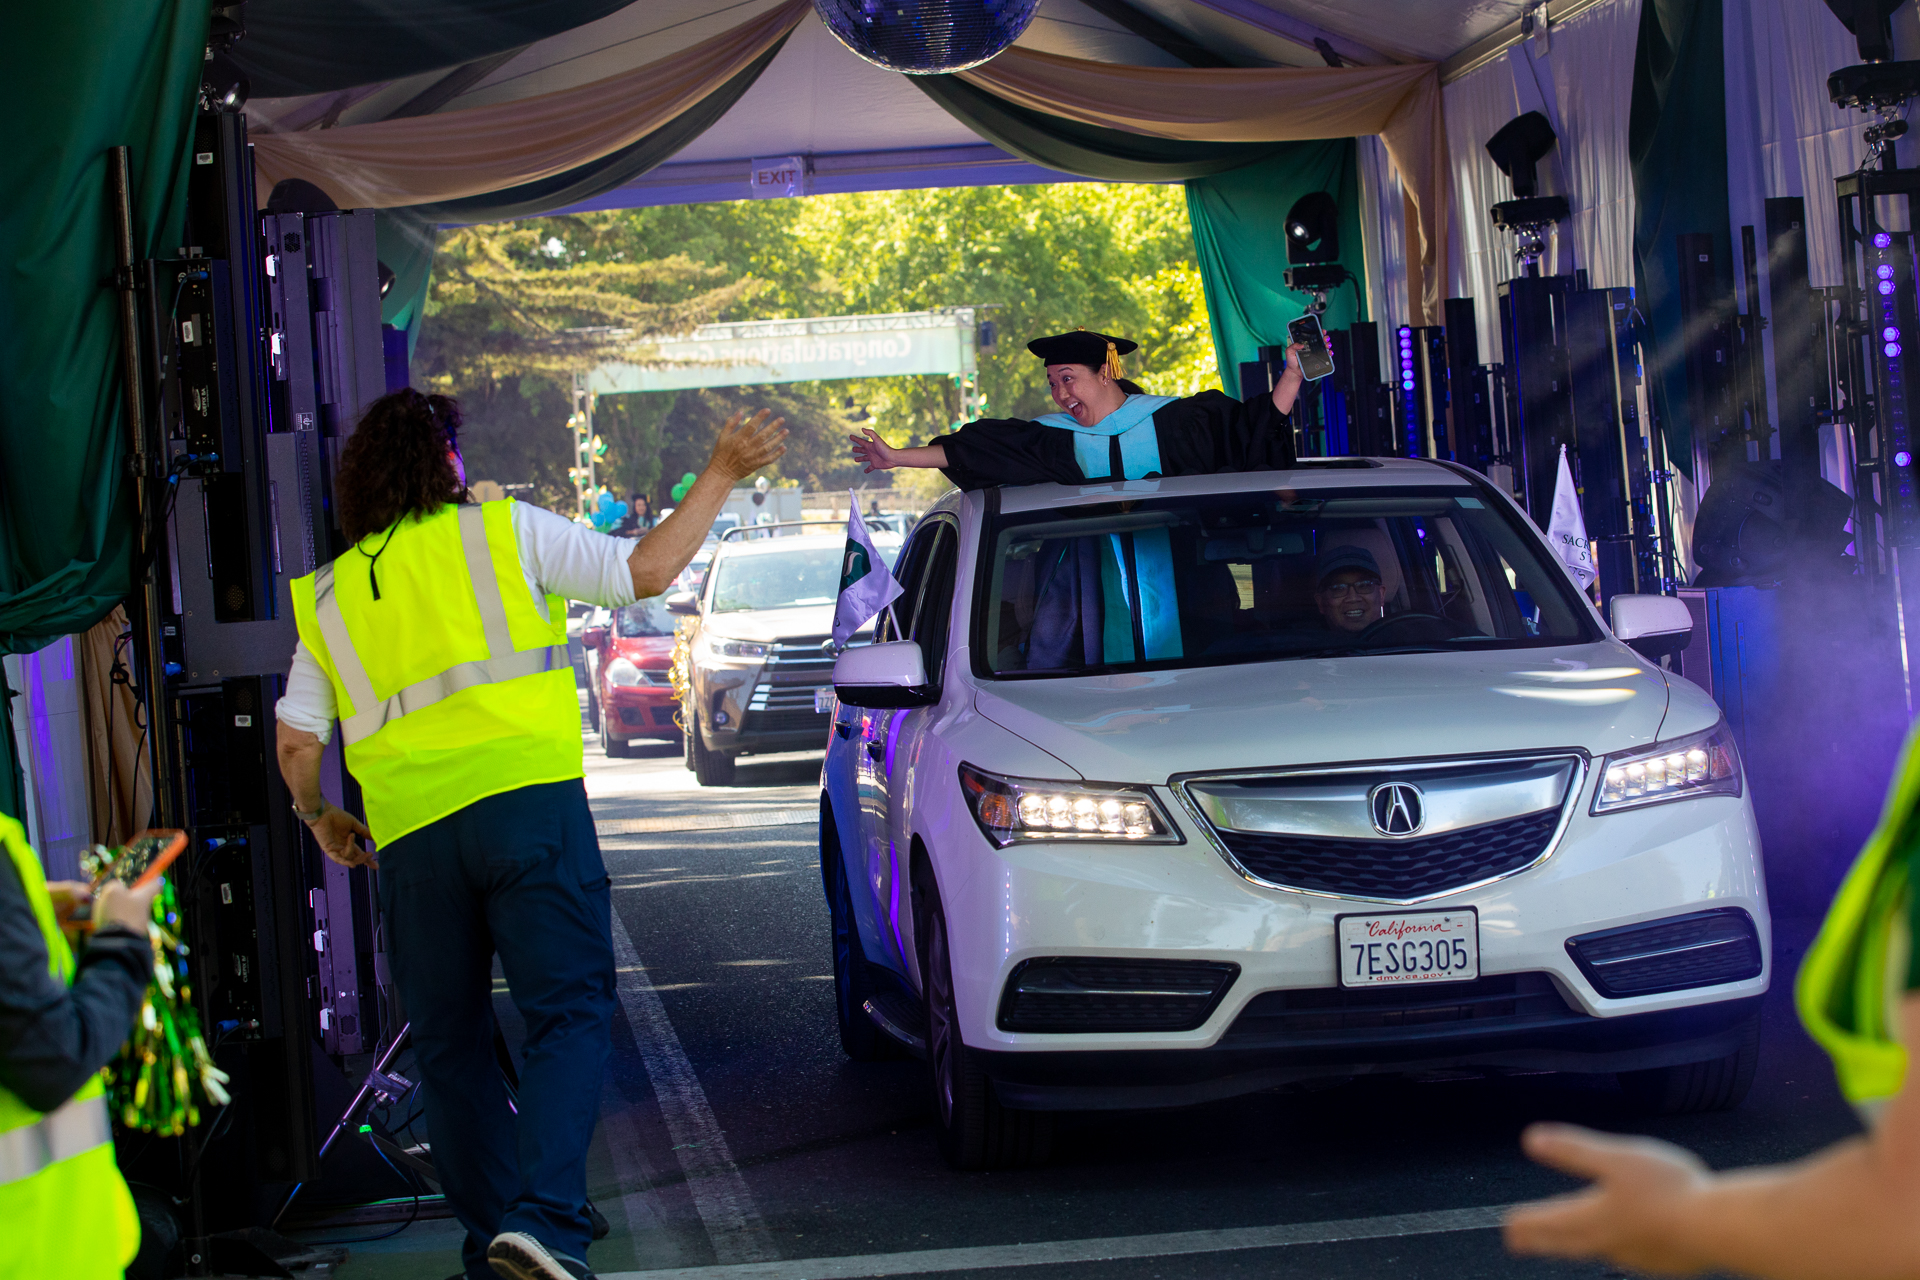 A Sac State graduate in a cap and gown stands up in the passenger seat of a car as it passes through a tent filled with lights and sound equipment.. 